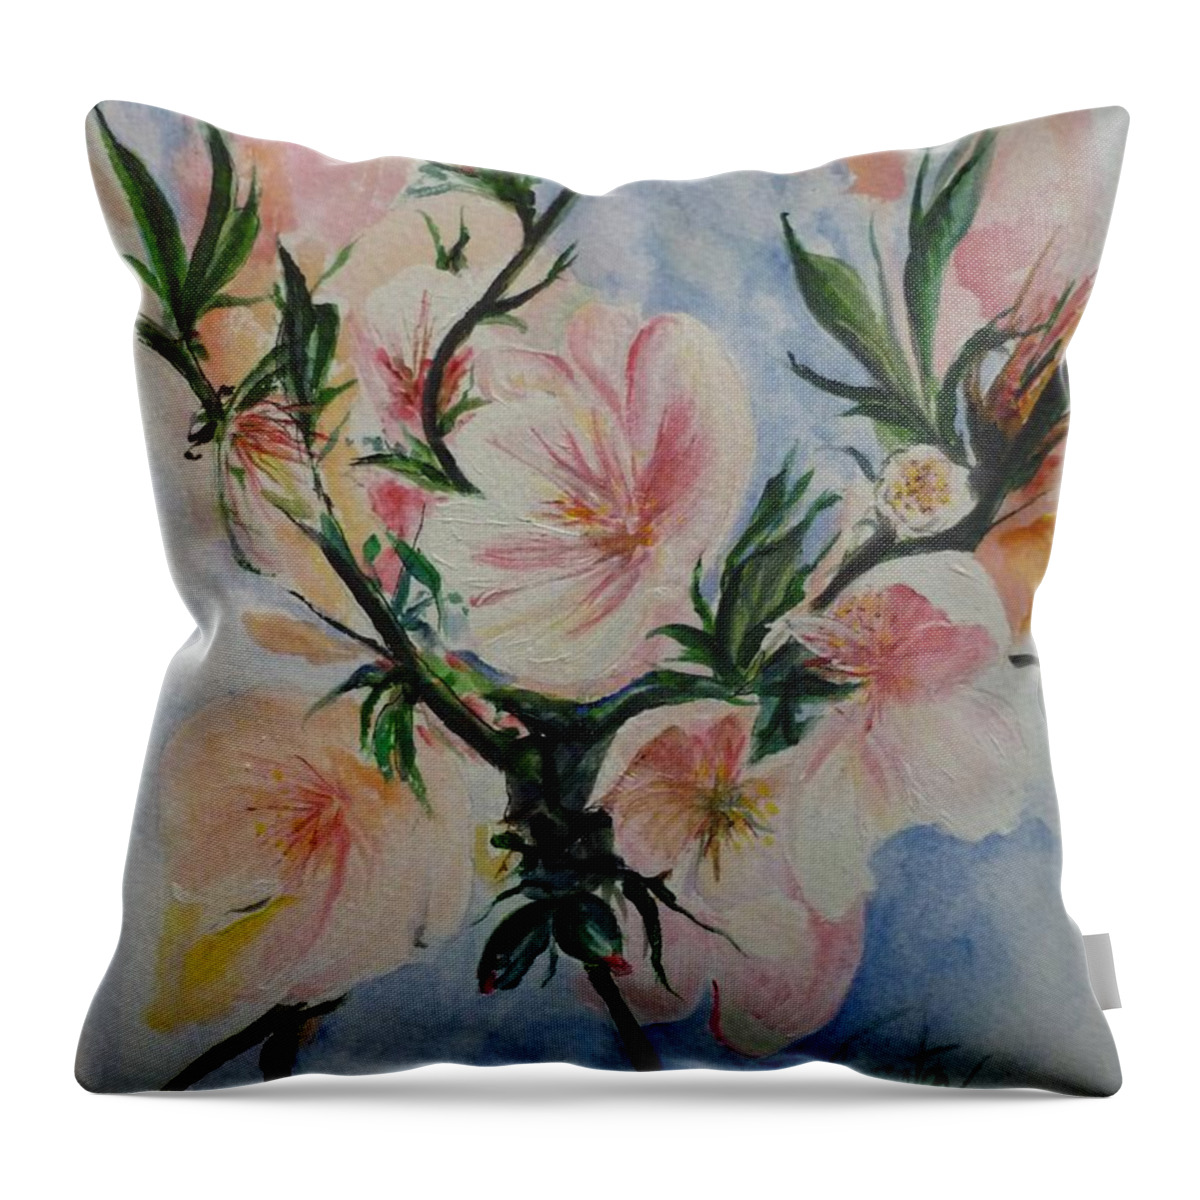 Flowers Throw Pillow featuring the painting Almond Blossom by Lizzy Forrester